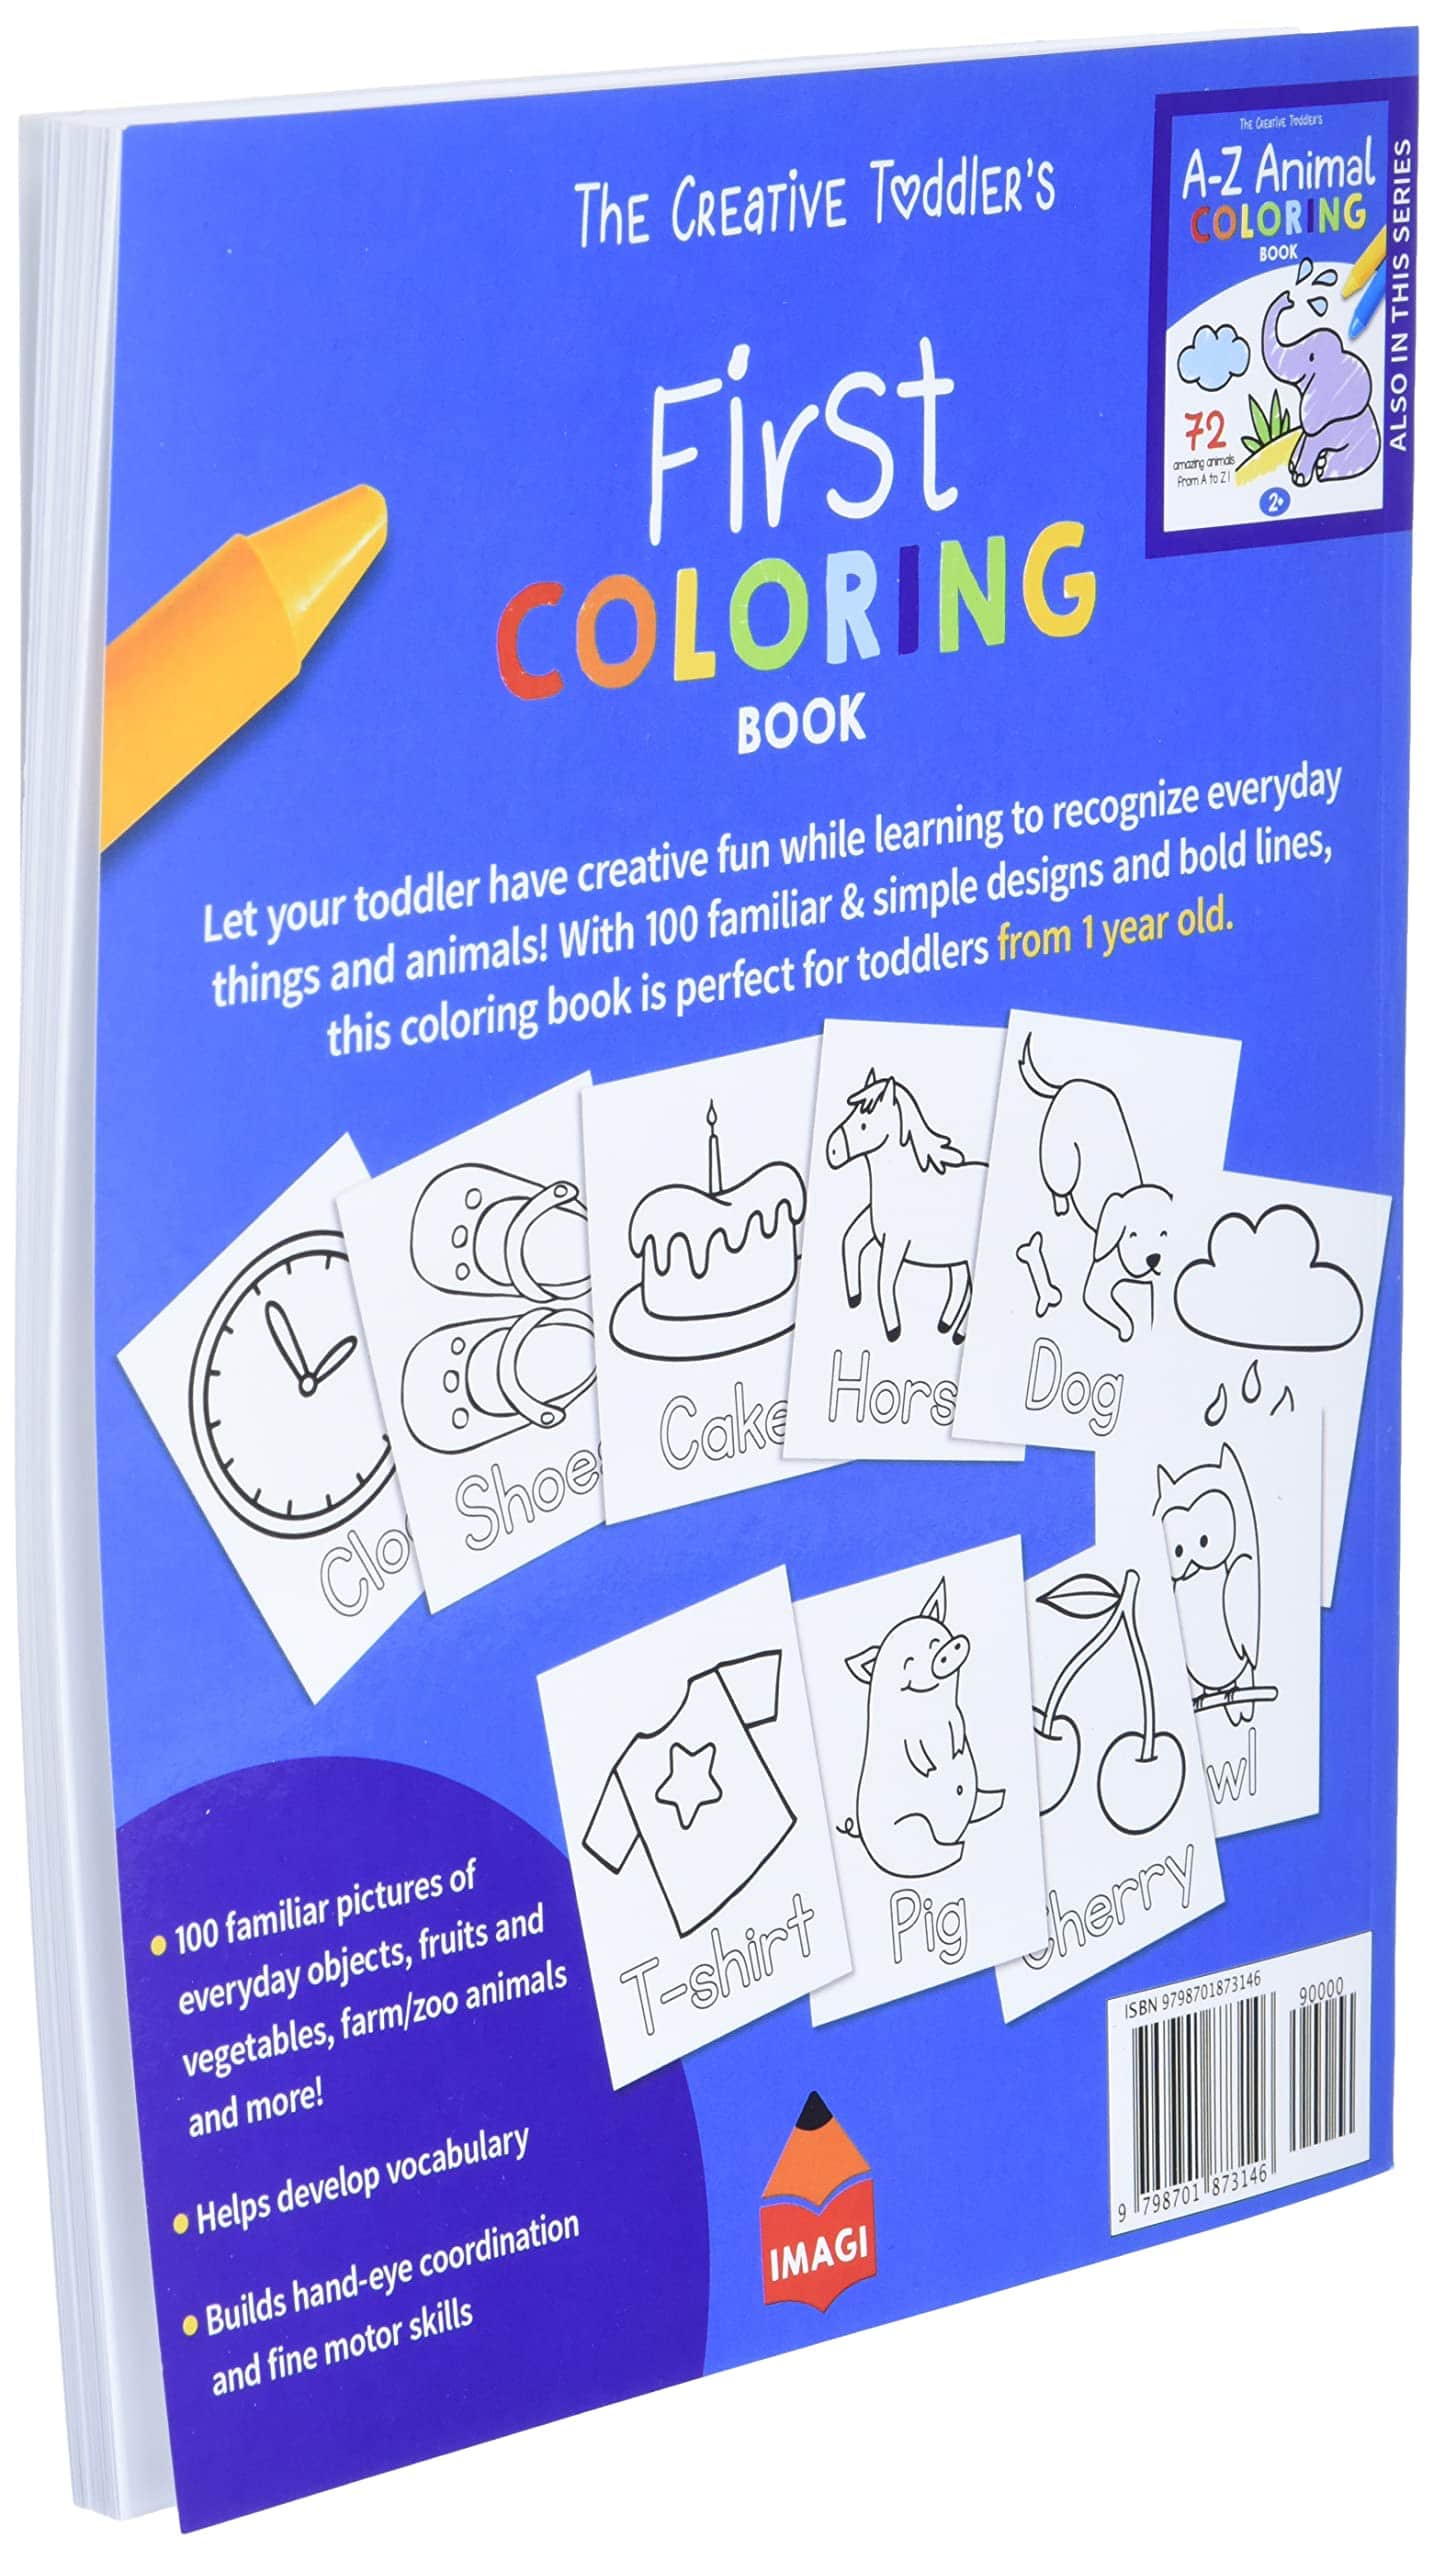 The Creative Toddler’s First Coloring Book side